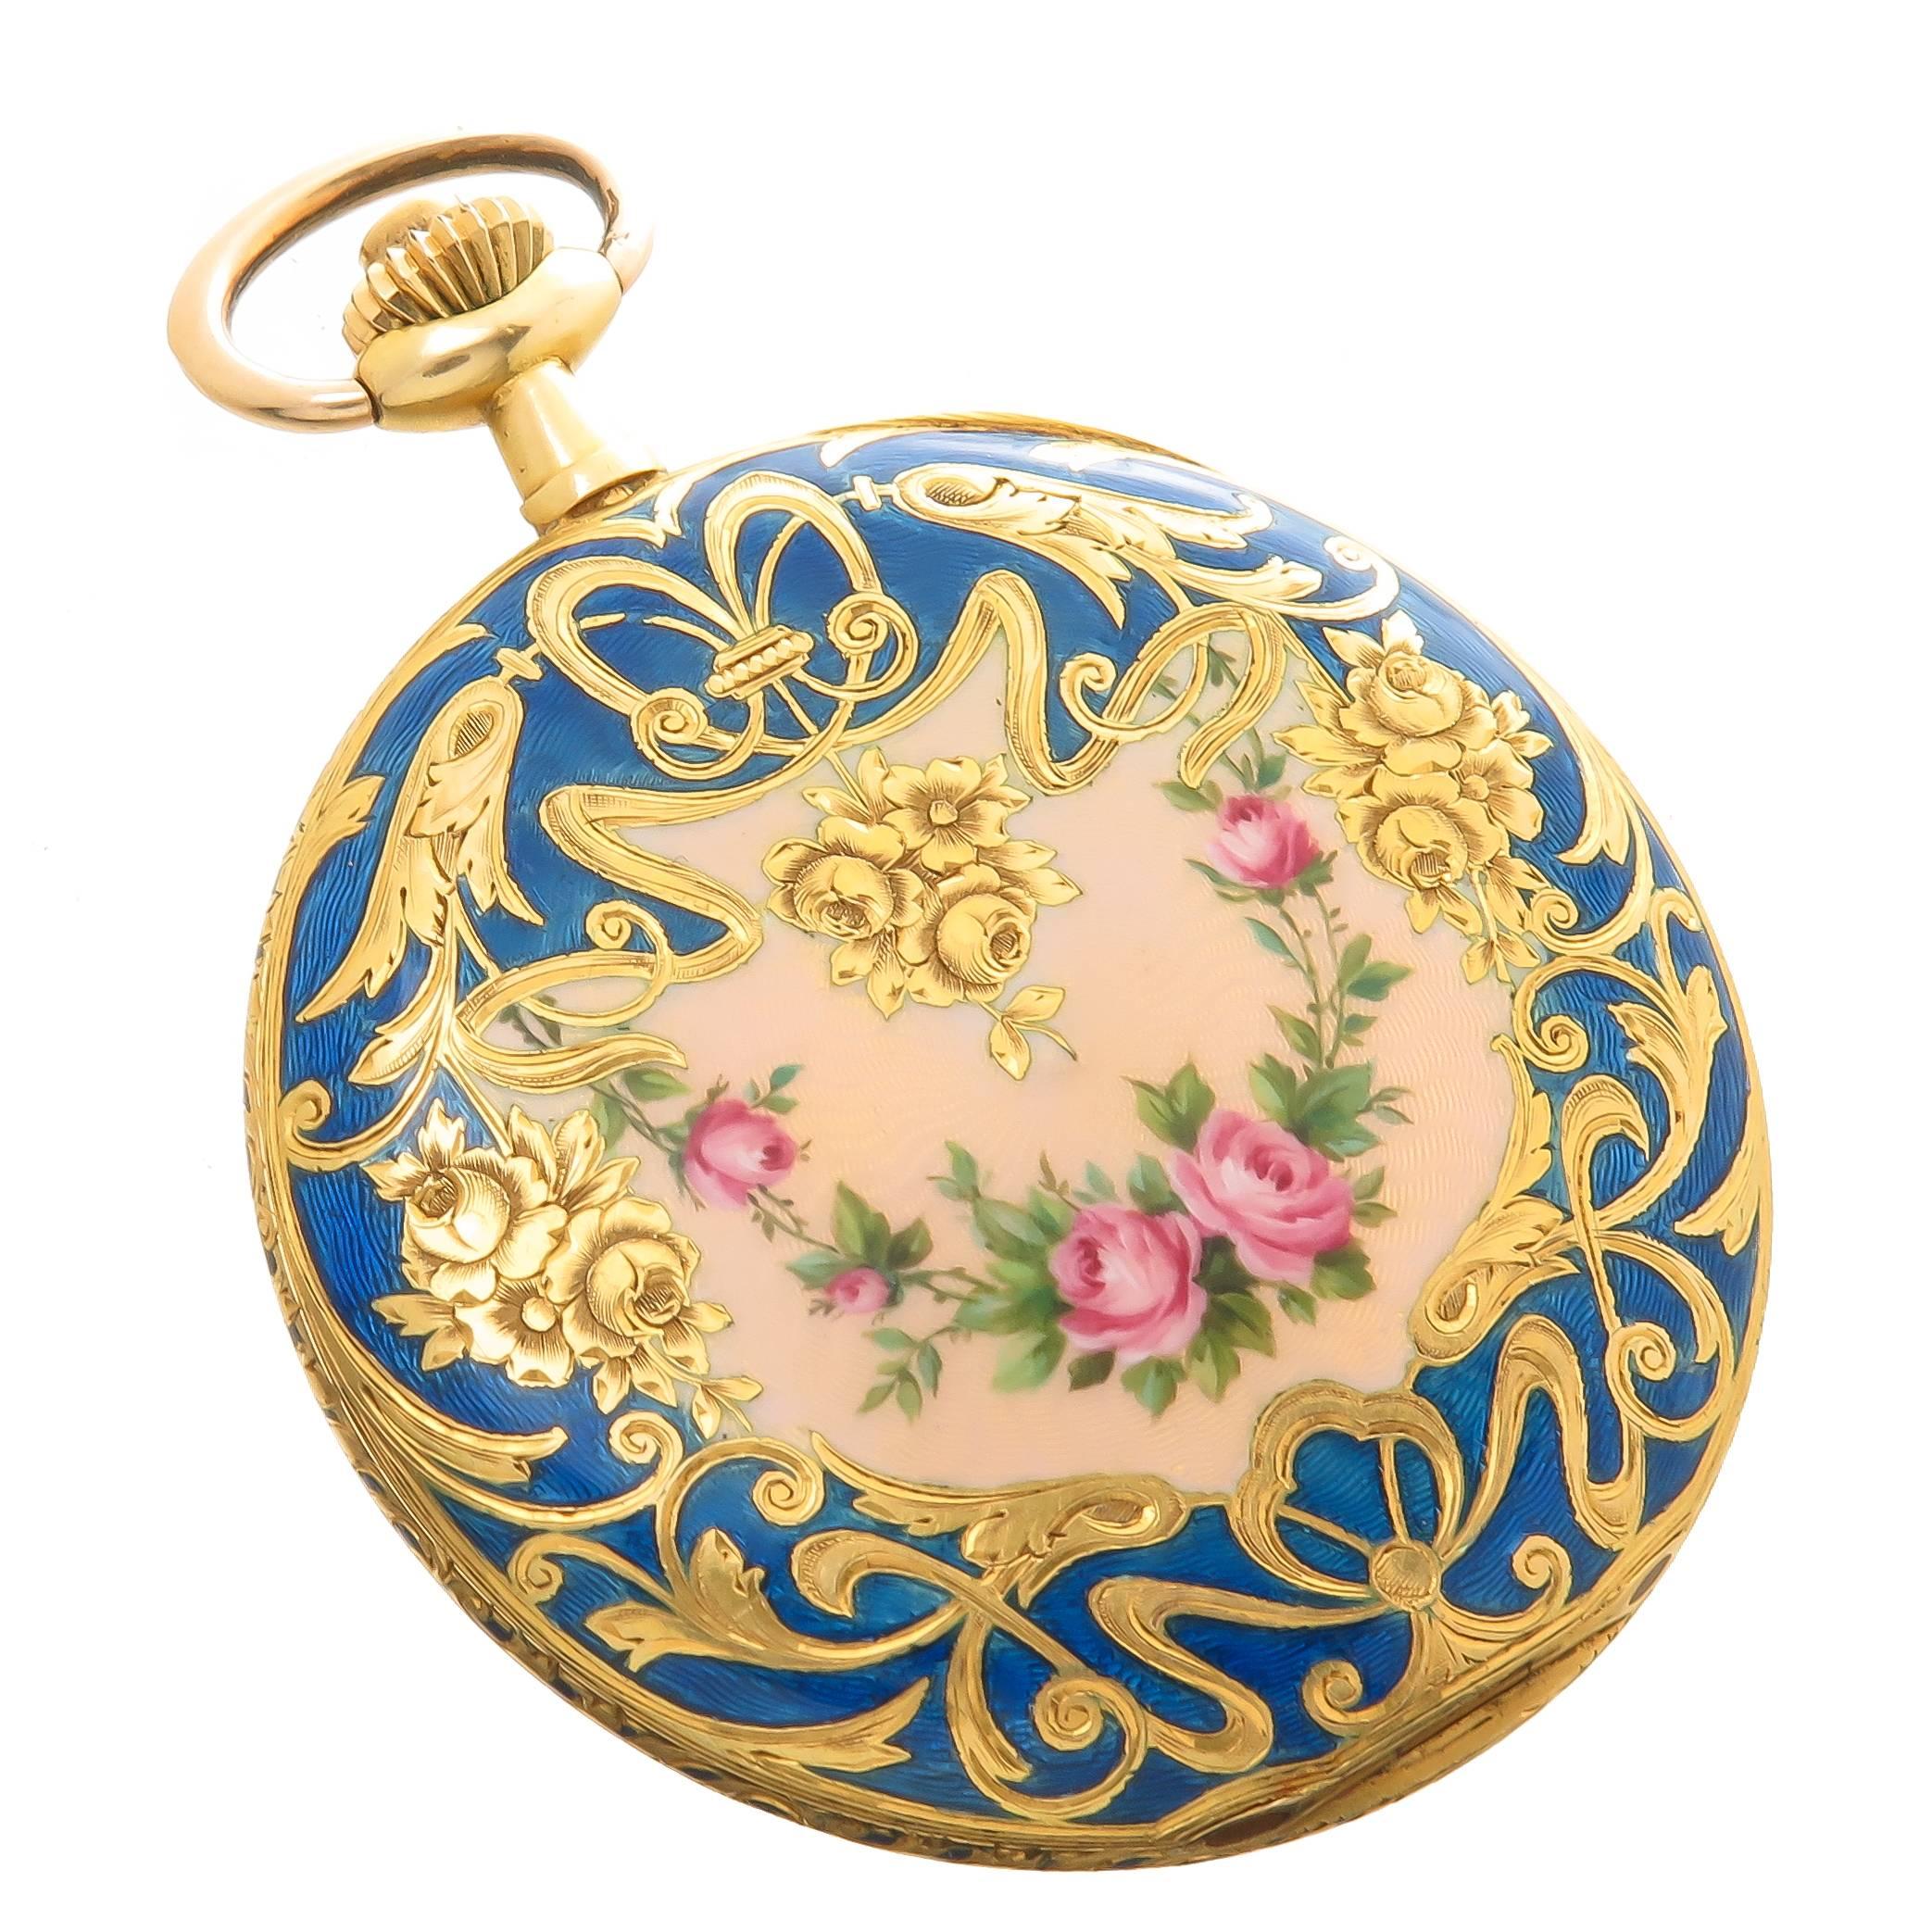 Circa 1920 18K yellow Gold covered case Pocket watch by Didisheim of Switzerland, 53 MM in Diameter and 8.5 MM thick. Guilloche Enamel on both sides of the case. 17 Jewel manual wind nickle lever movement. Gold engine turned dial. Excellent, near